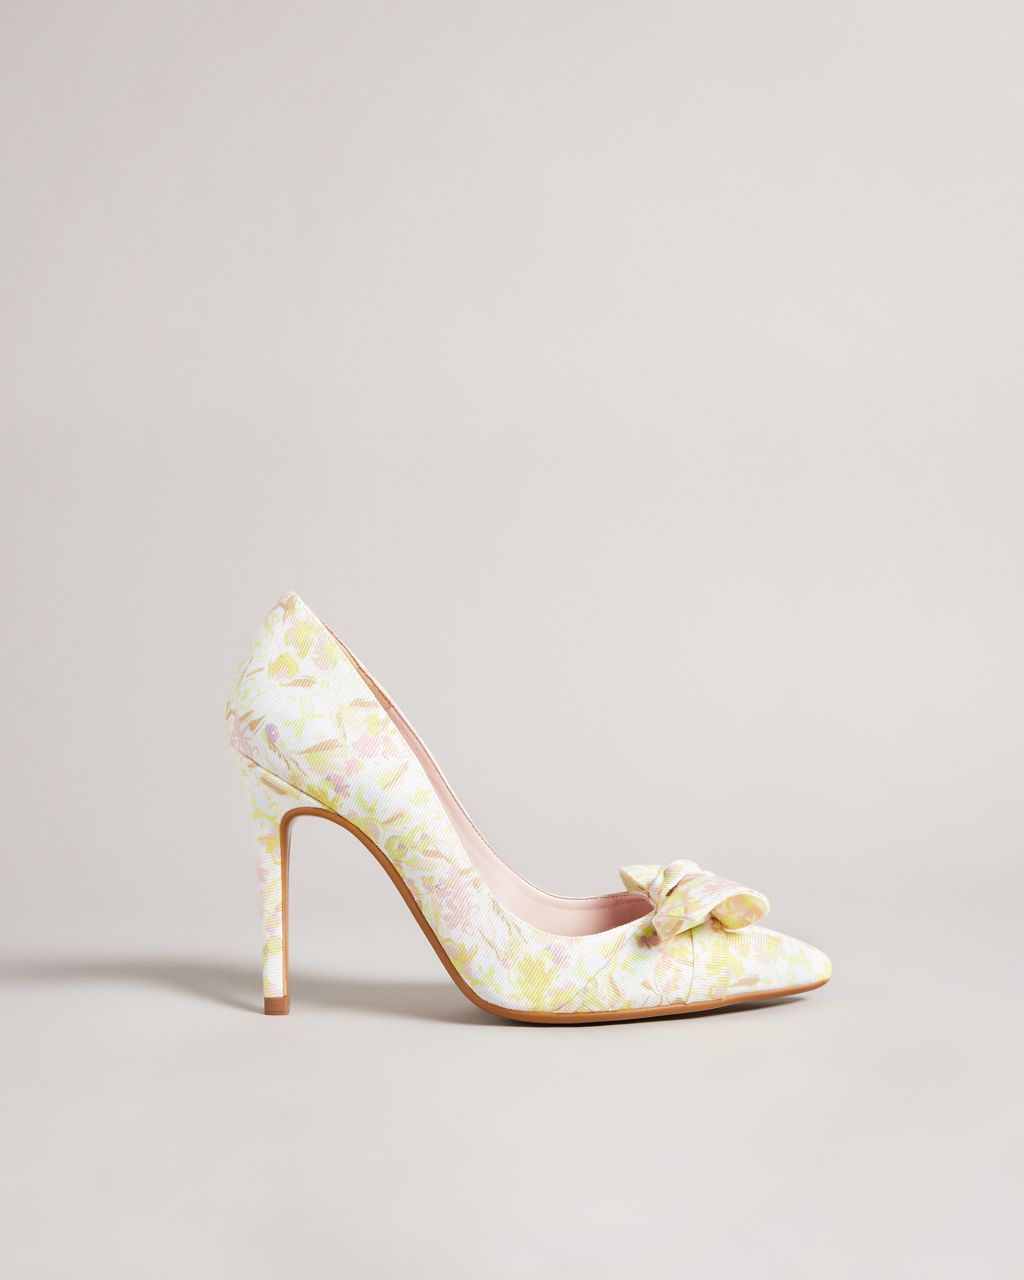 Ted Baker Women's Sketchy Magnolia 100Mm Bow Court Shoe in Medium Yellow, Neomah